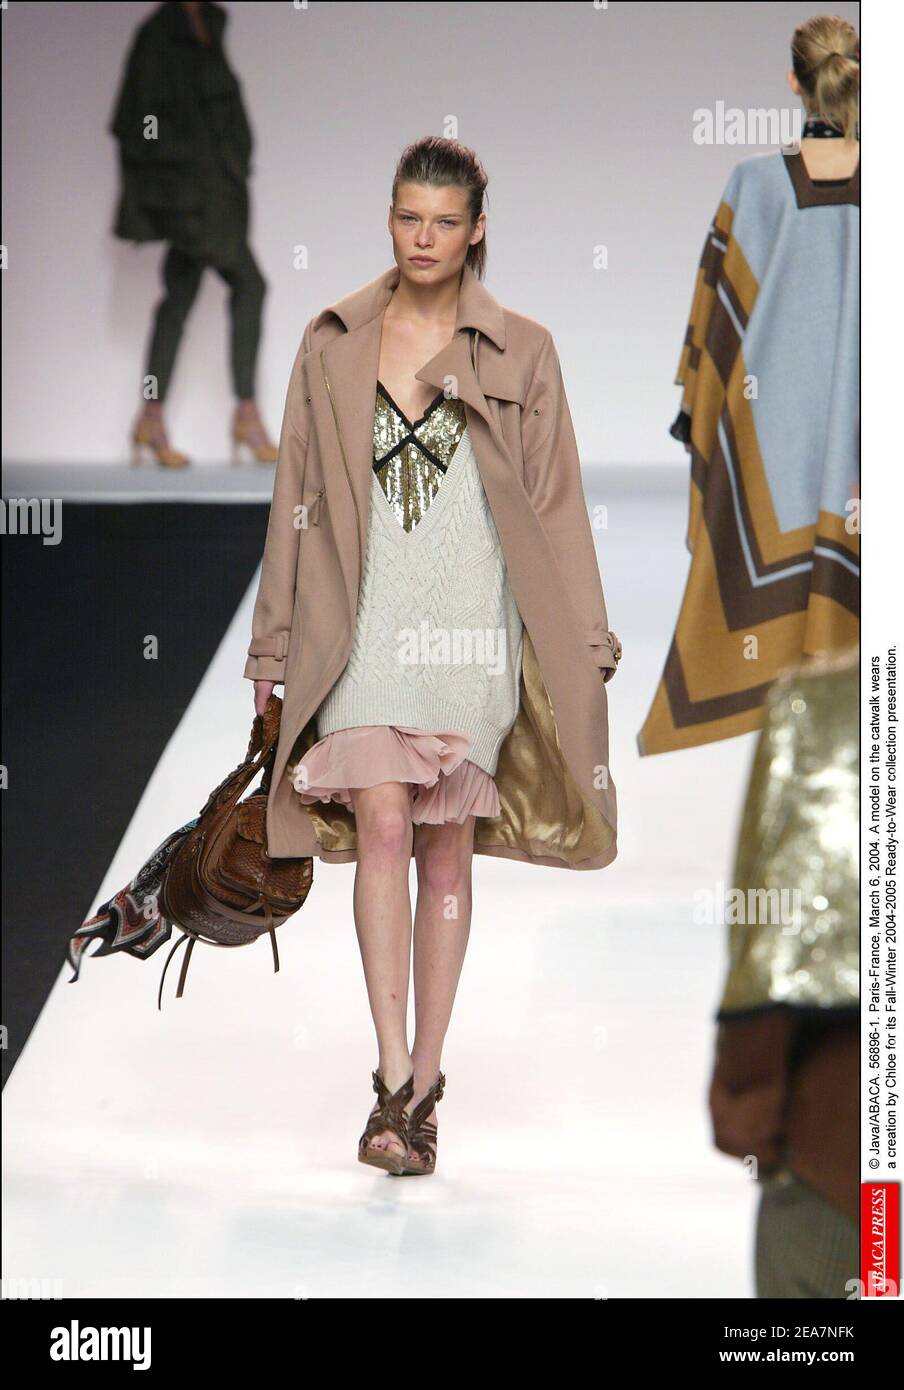 © Java/ABACA. 56896-1. Paris-France, March 6, 2004. A model on the catwalk wears a creation by Chloe for its Fall-Winter 2004-2005 Ready-to-Wear collection presentation. Stock Photo